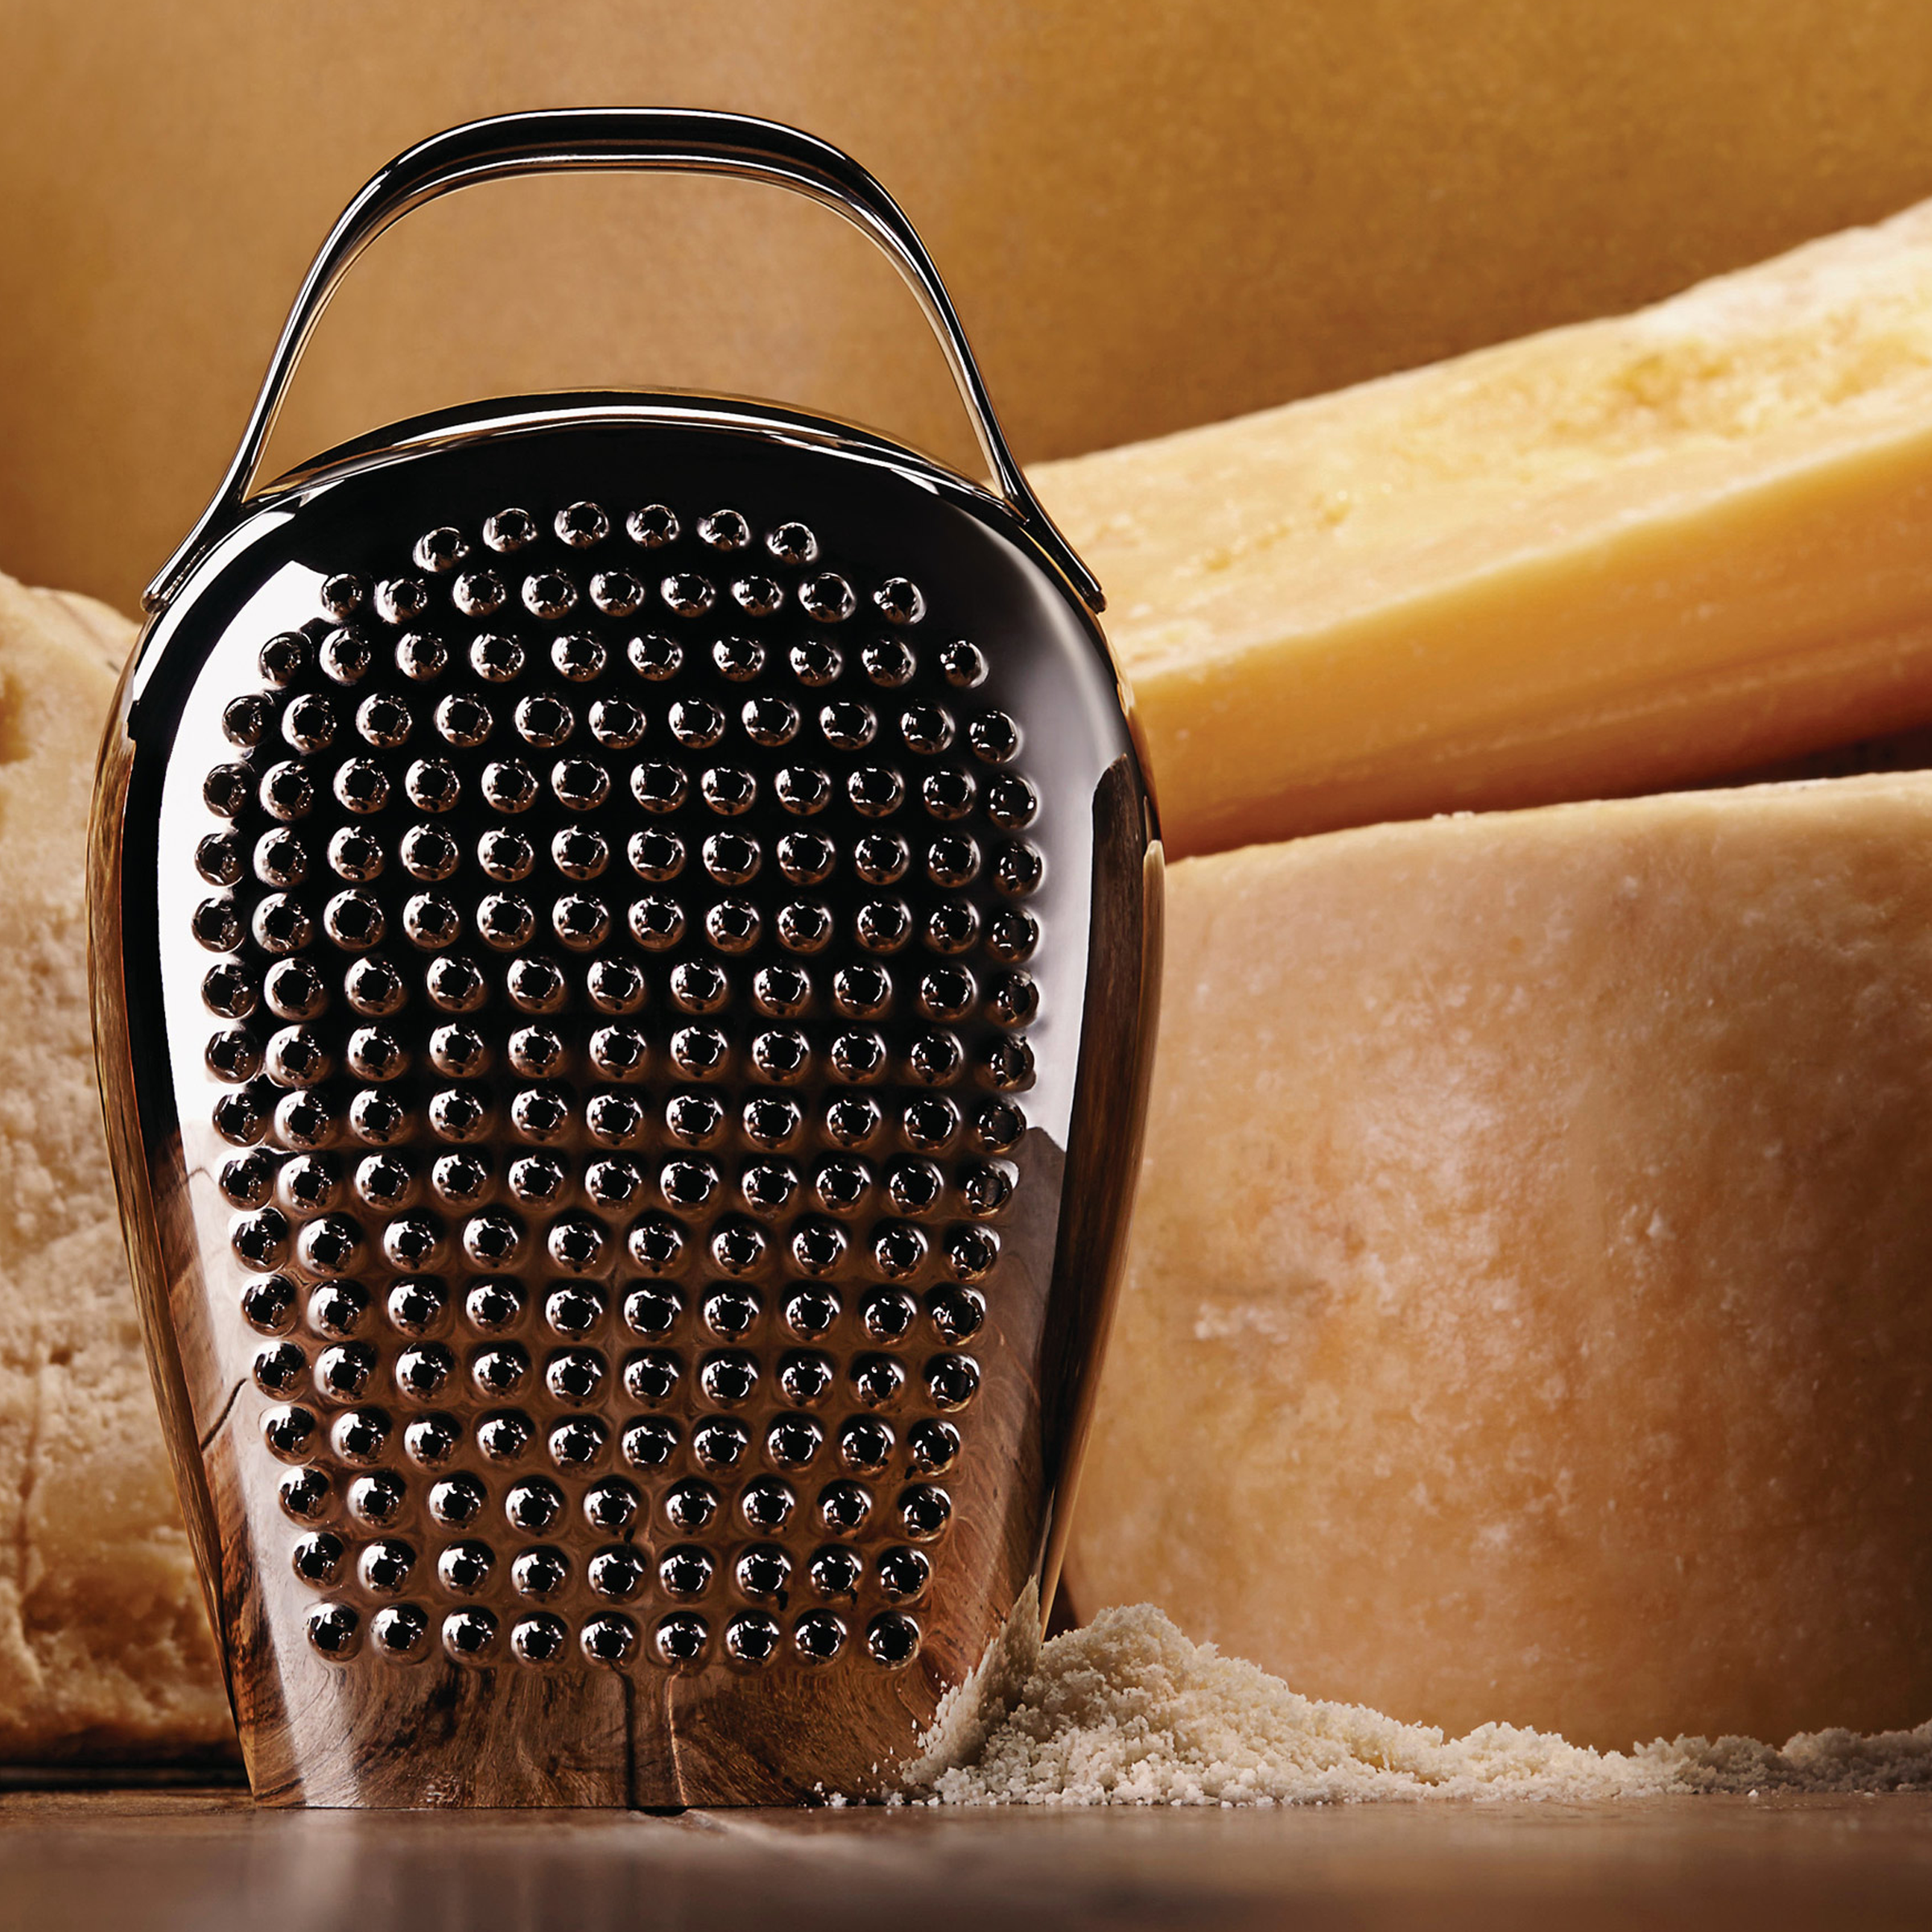 cheese please by gabriele chiave for alessi.